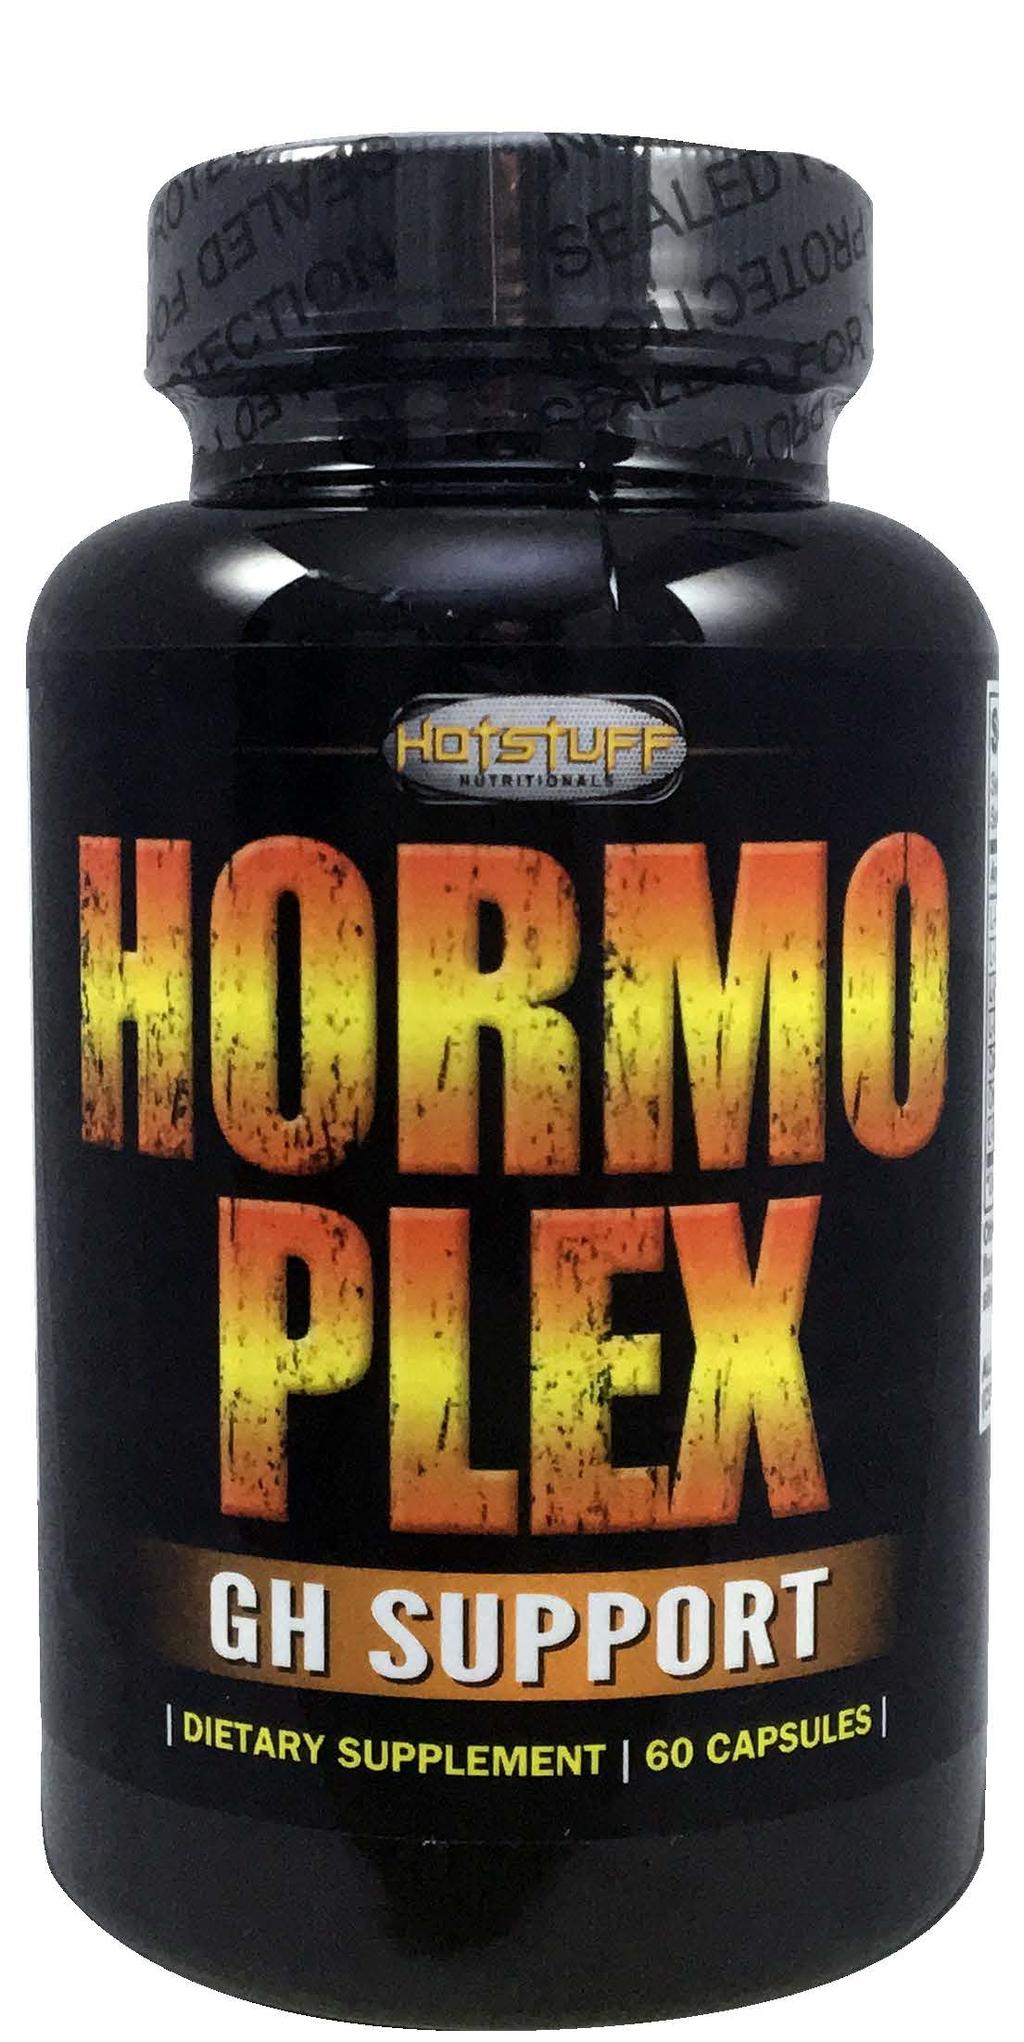 It s more than a natural GH booster. It s more than a testosterone Booster. It s more than a sleep aid.